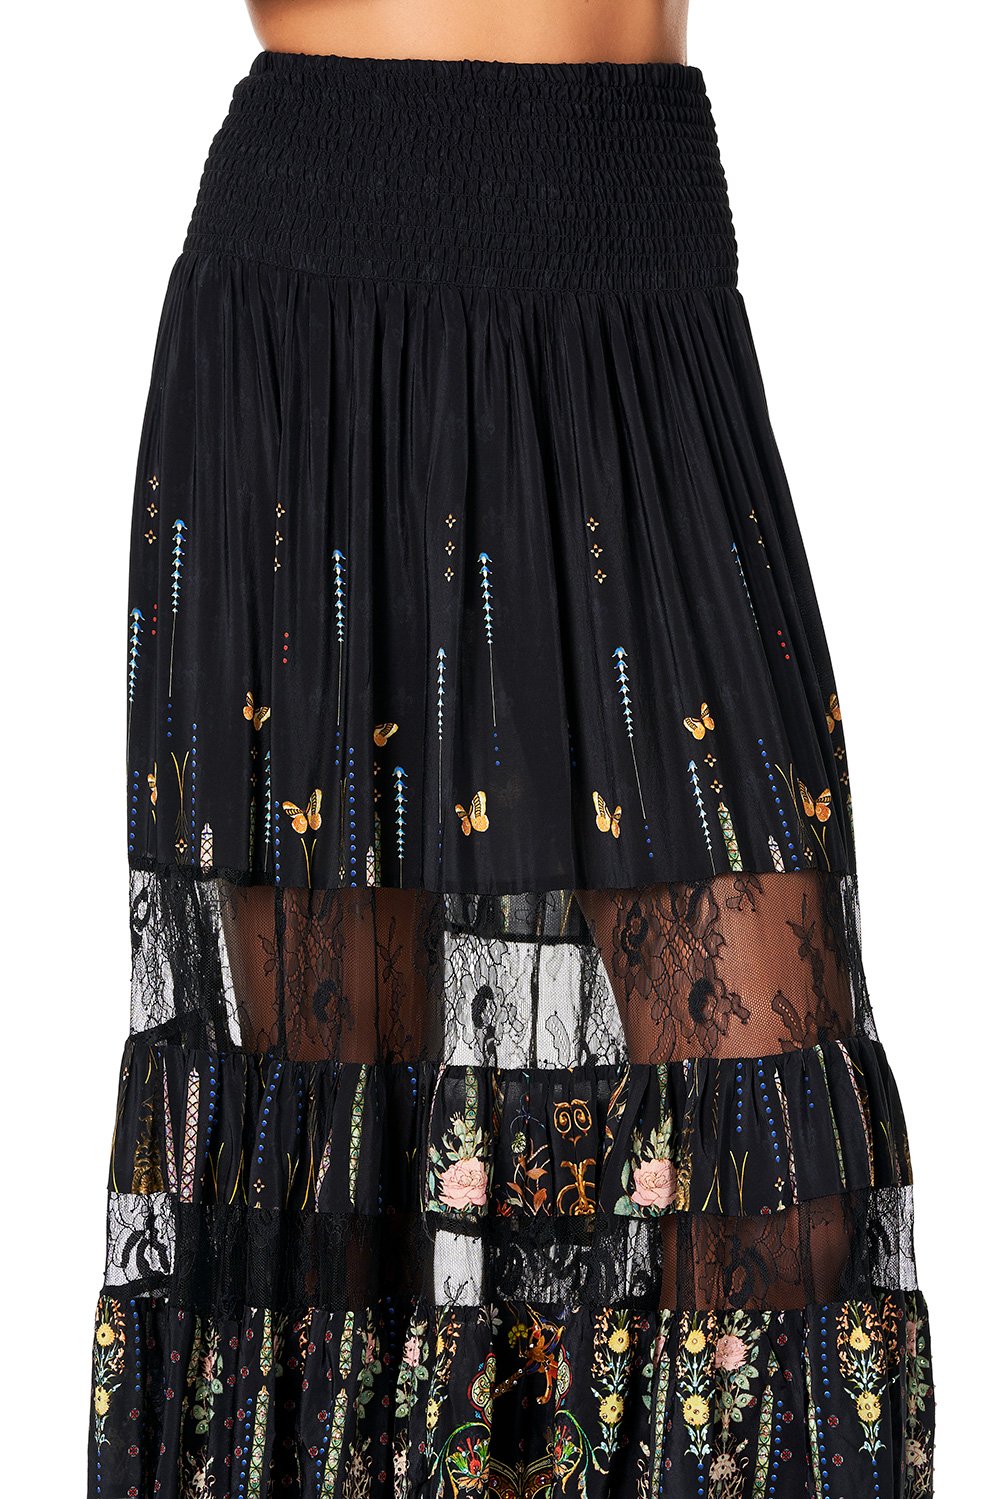 CAMILLA MAXI SKIRT WITH LACE INSERTS REBELLE REBELLE